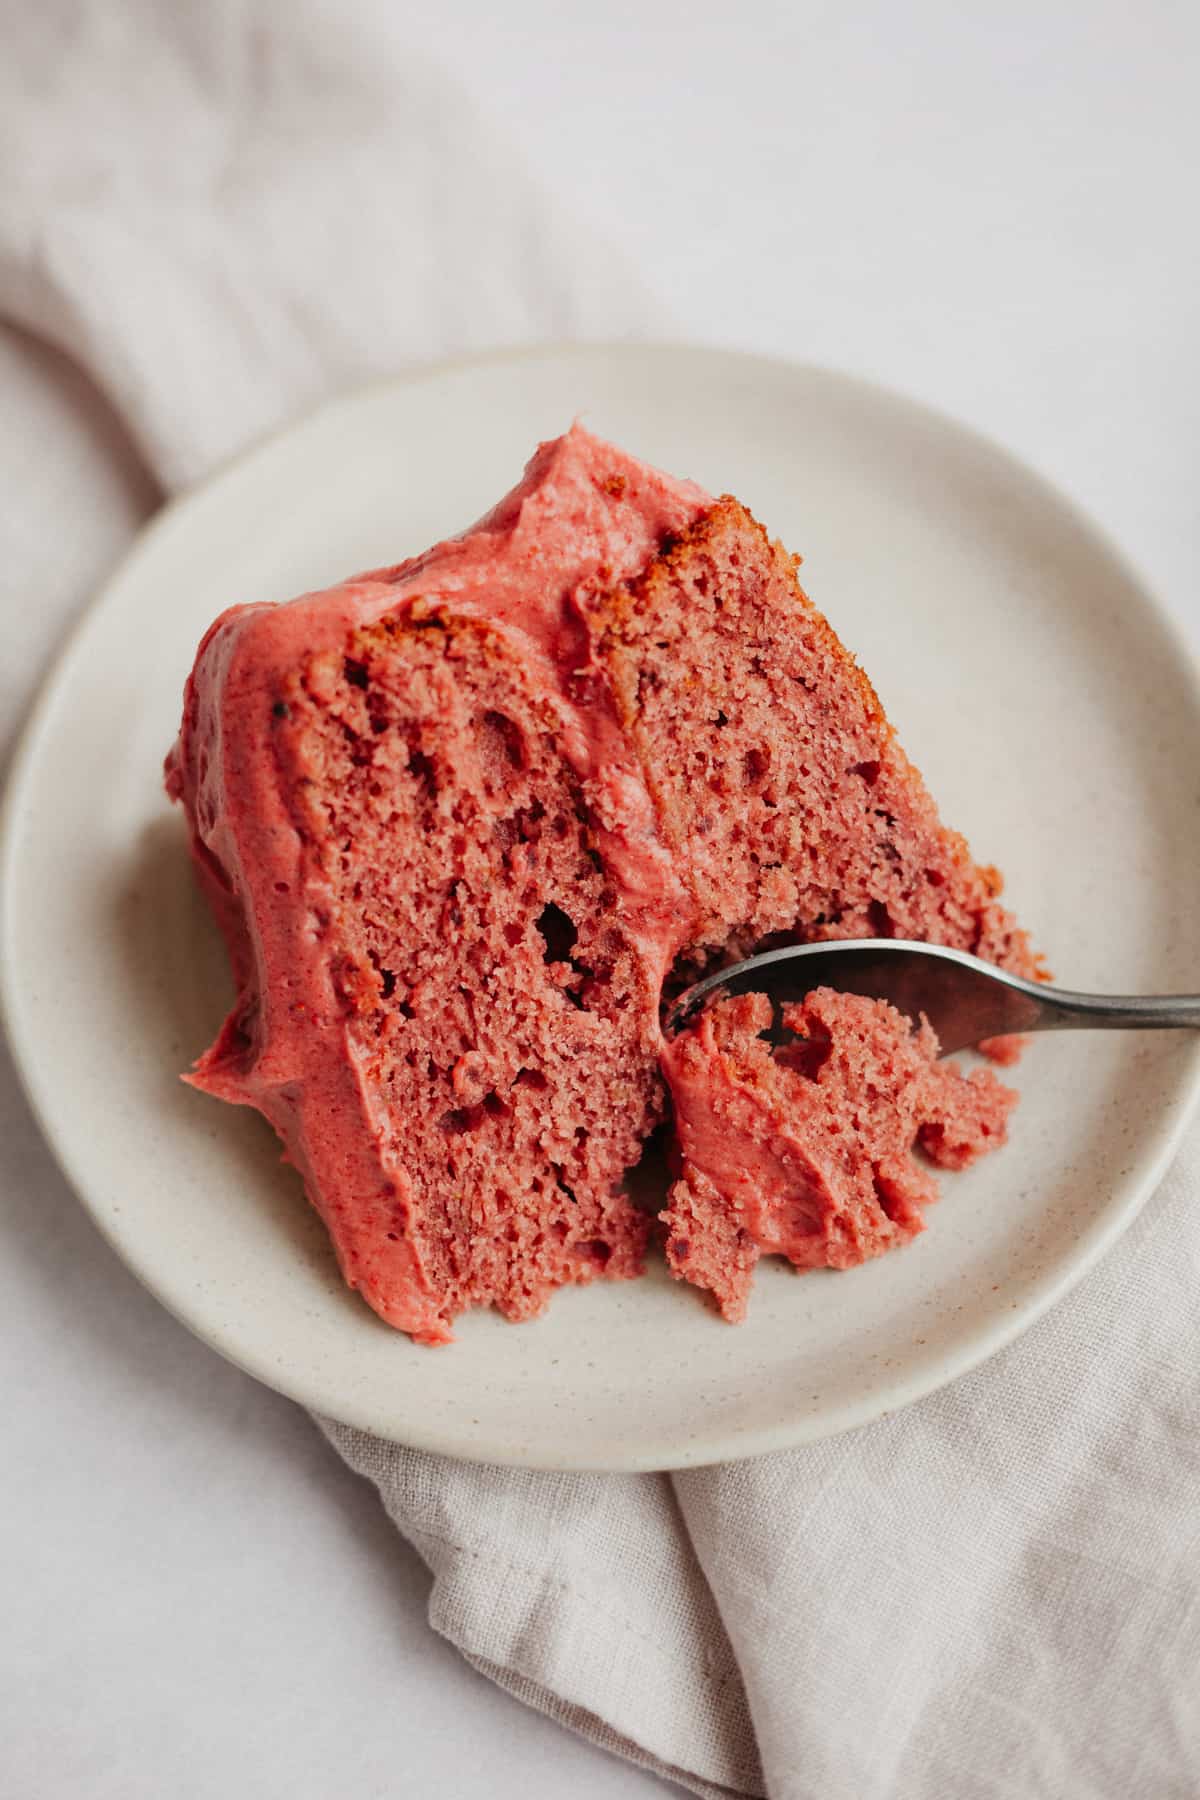 A slice of strawberry pink cake on a small beige plate